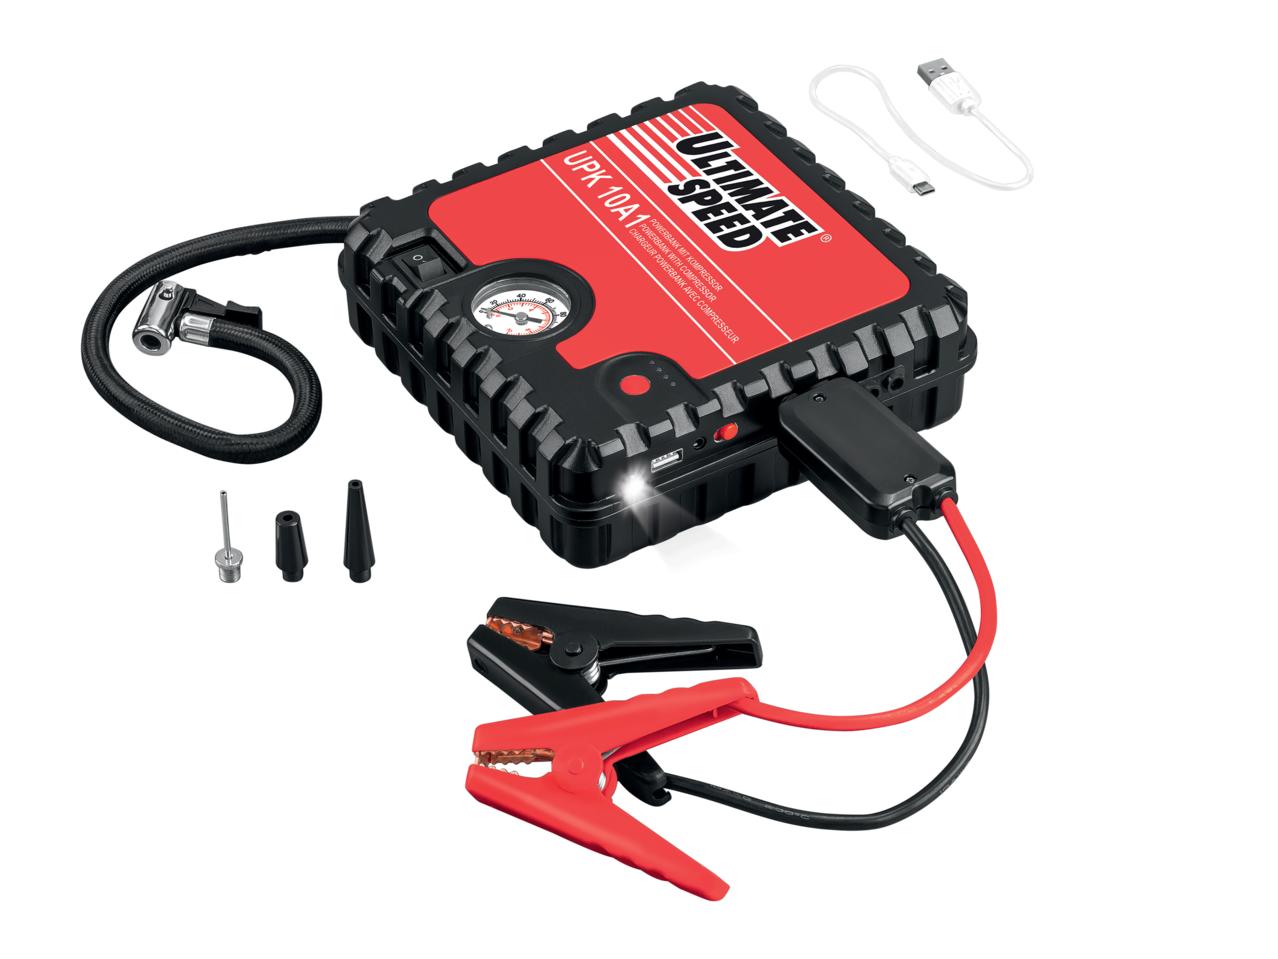 ULTIMATE SPEED Jump-start Power Bank with Compressor